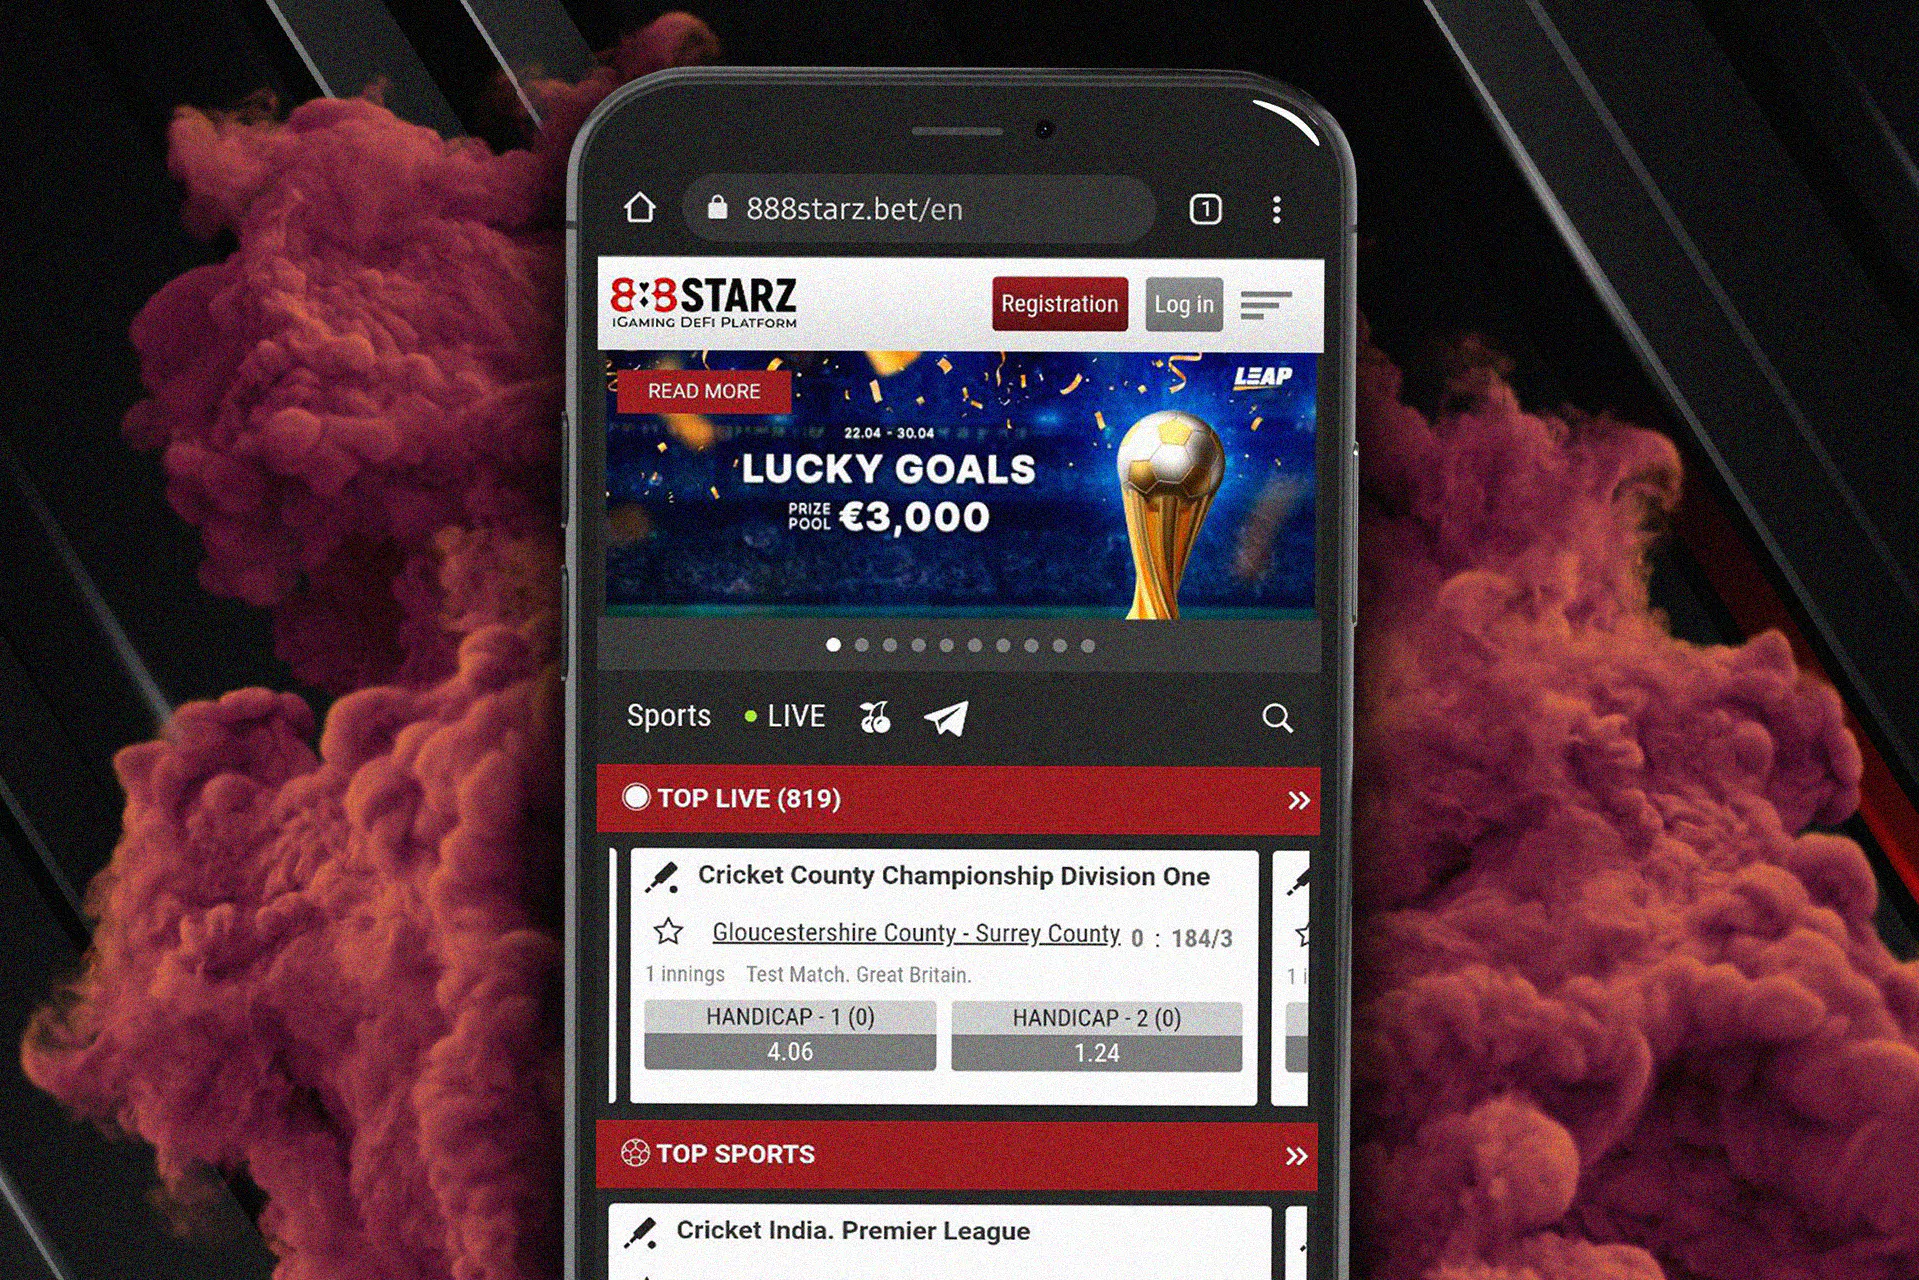 You can bet at 888starz in the mobile browser instaed of the app.